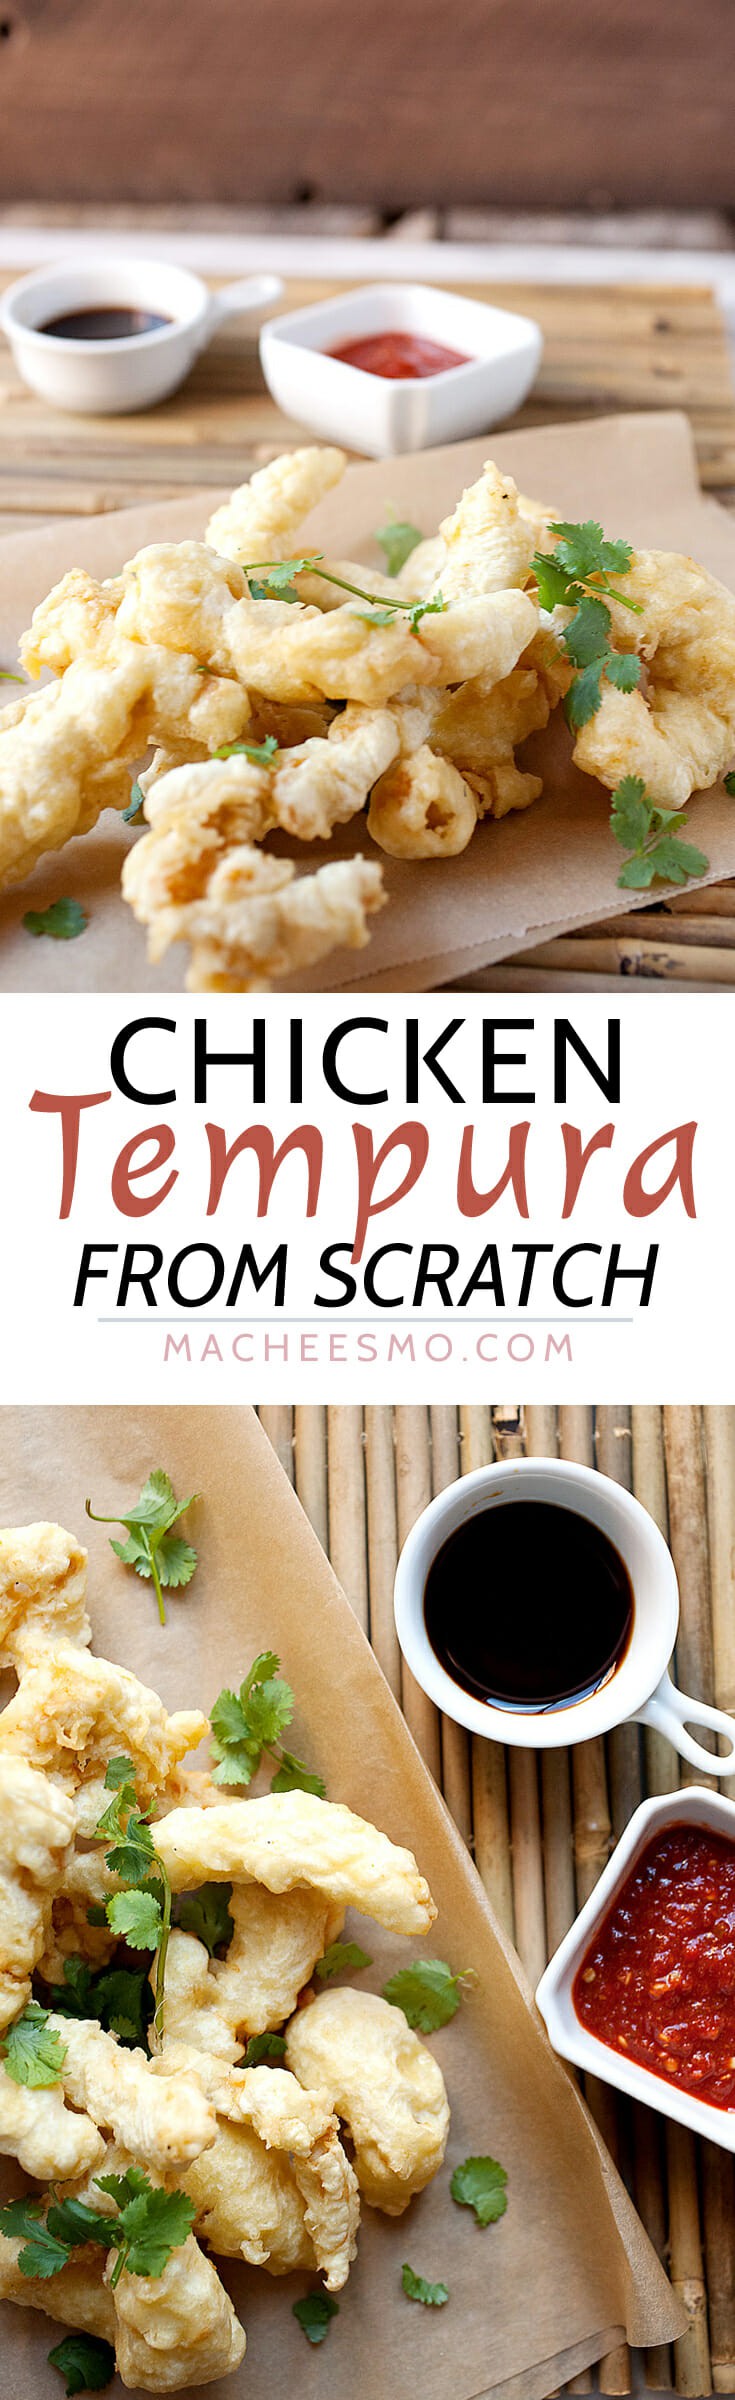 Any fried food is comfort food, but there's something special about super-crispy chicken tempura. These are my tricks to getting it right! | macheesmo.com